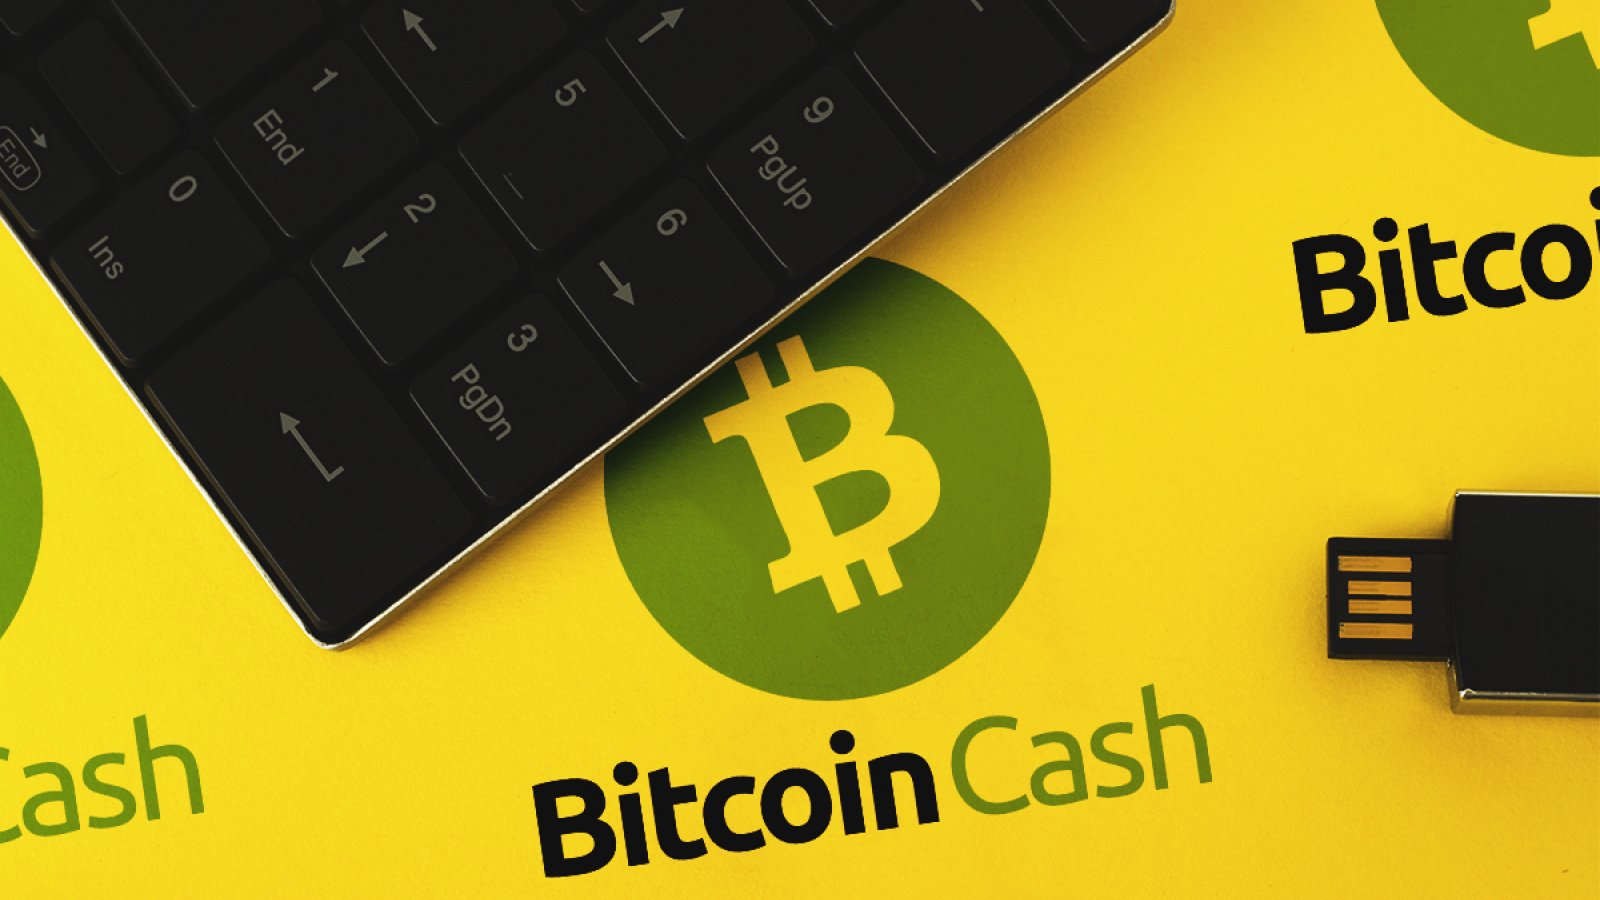 Bitcoin Cash Price Analysis 2019 20 25 How Much Mig!   ht Bch Cost - 